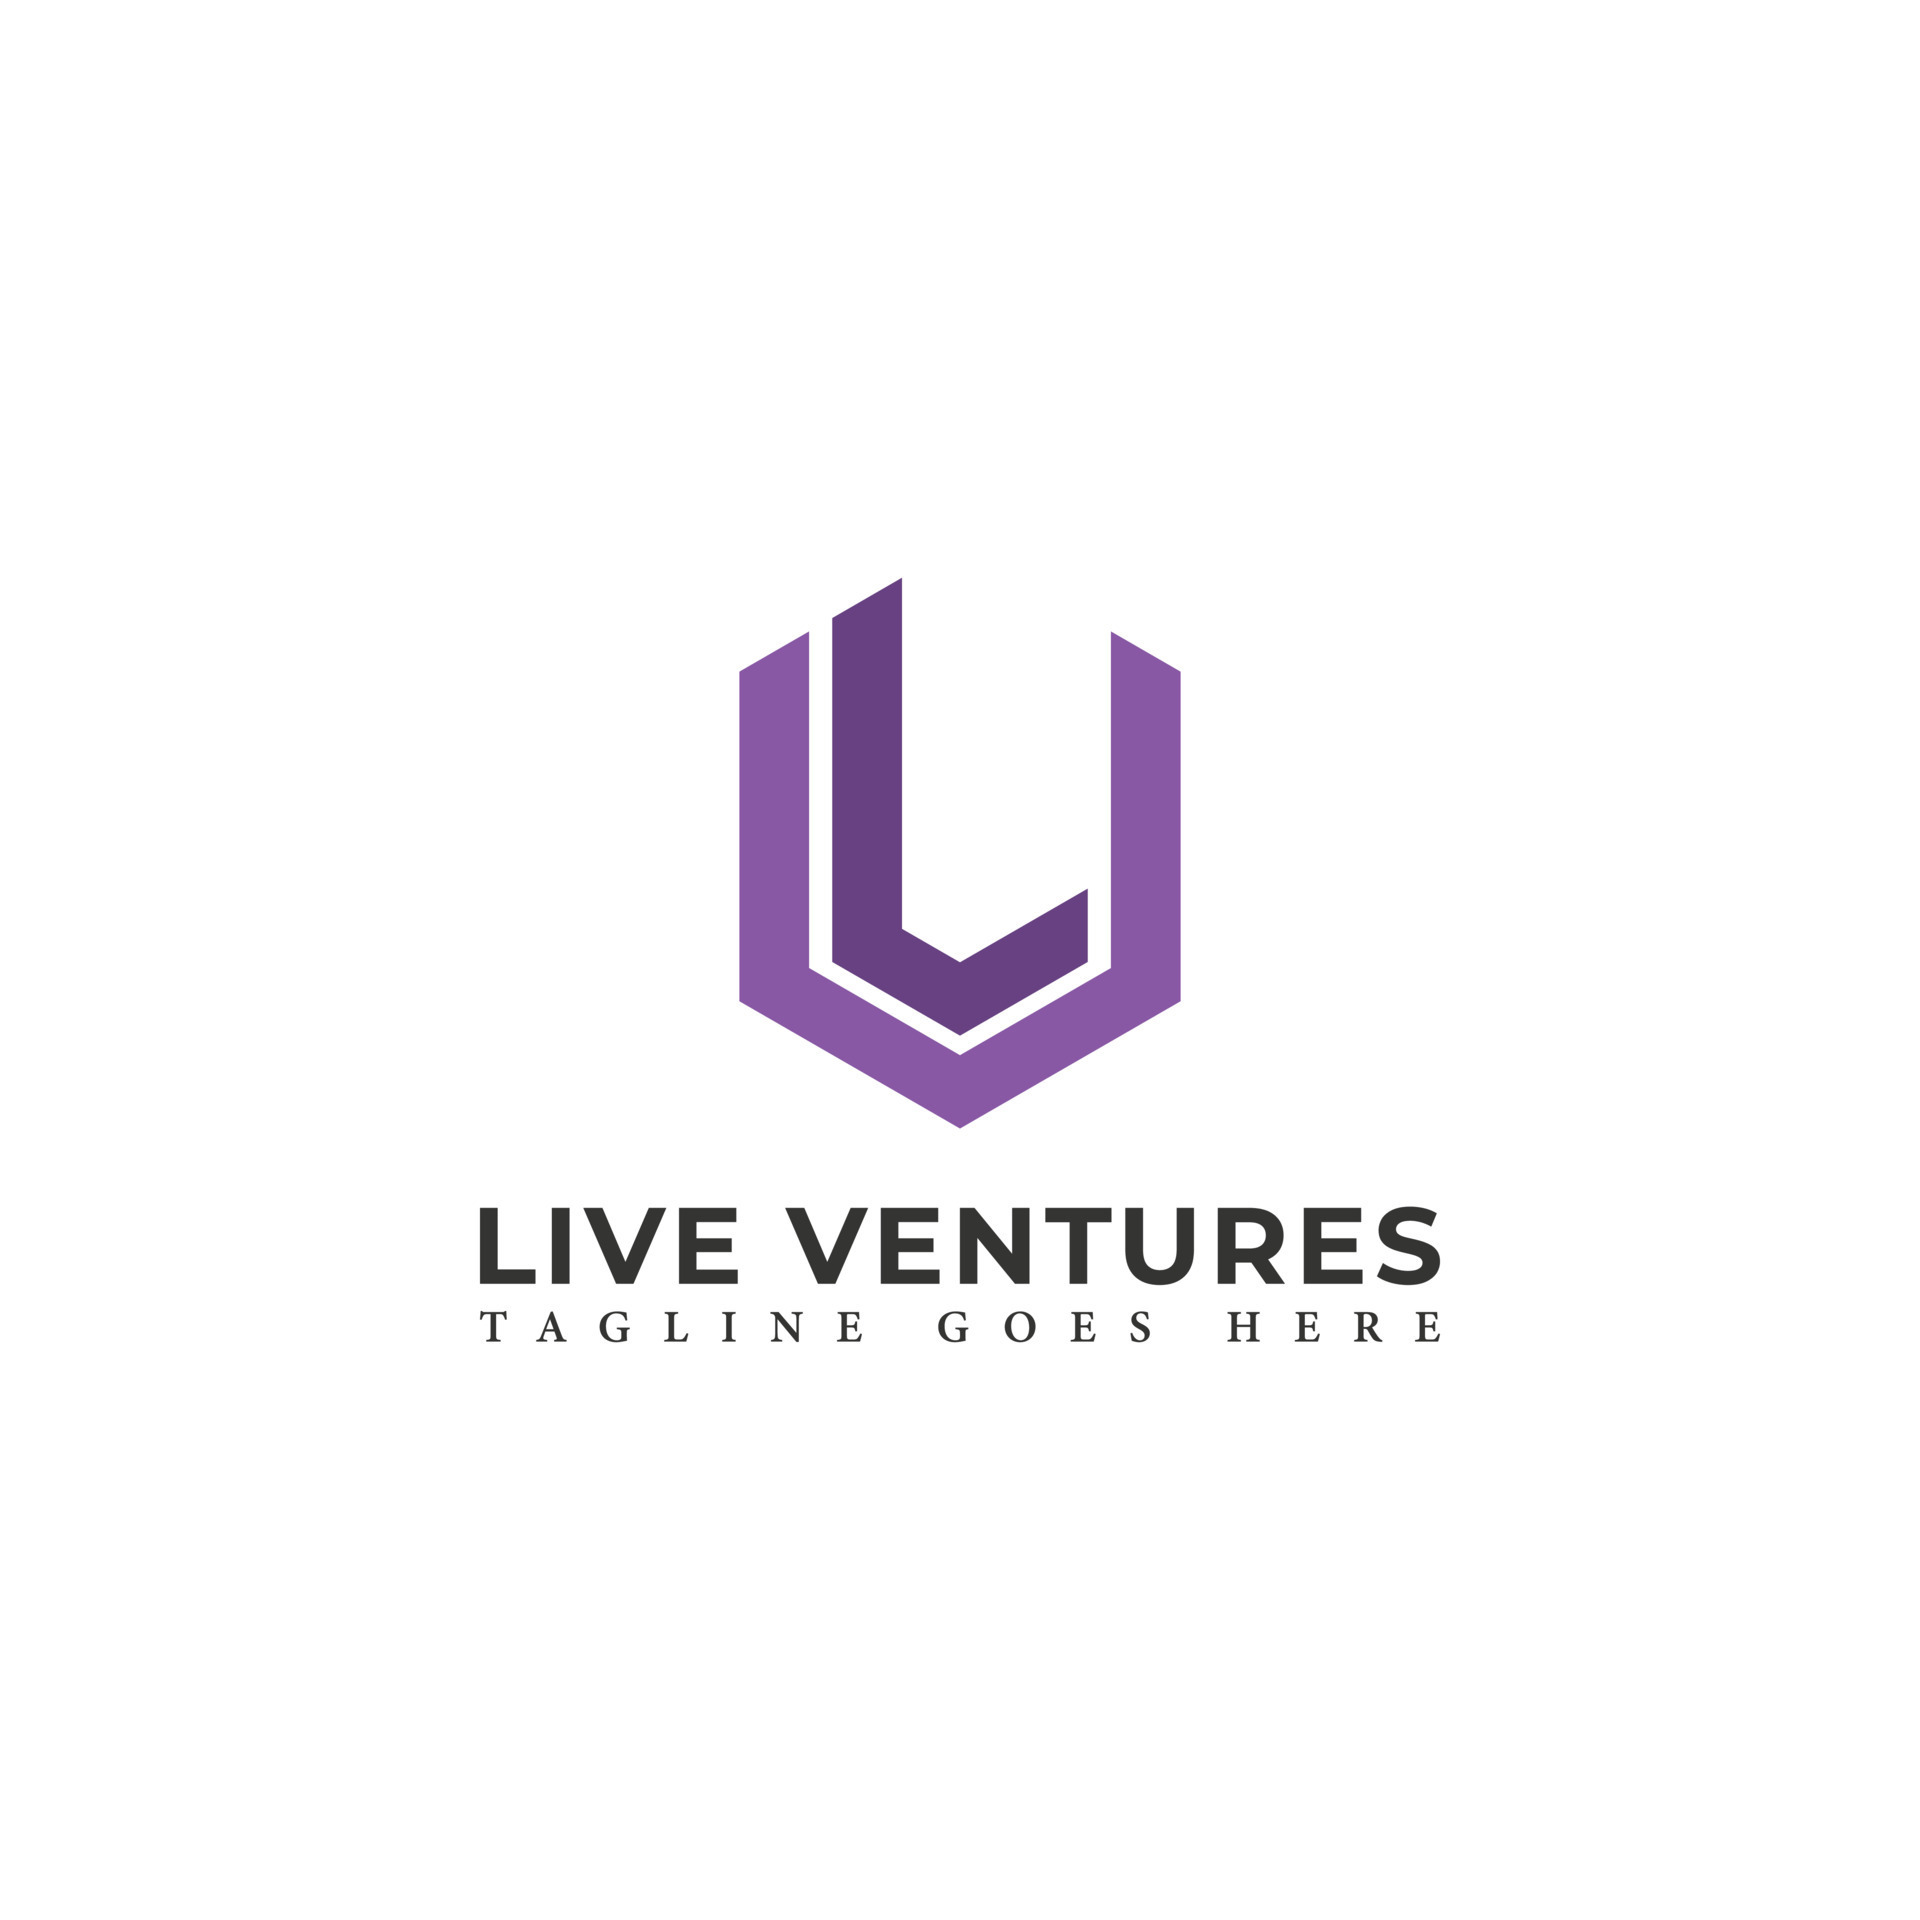 Abstract initial letter LV or VL logo in purple color isolated in white  background applied for venture capital firm logo also suitable for the  brands or companies have initial name VL or